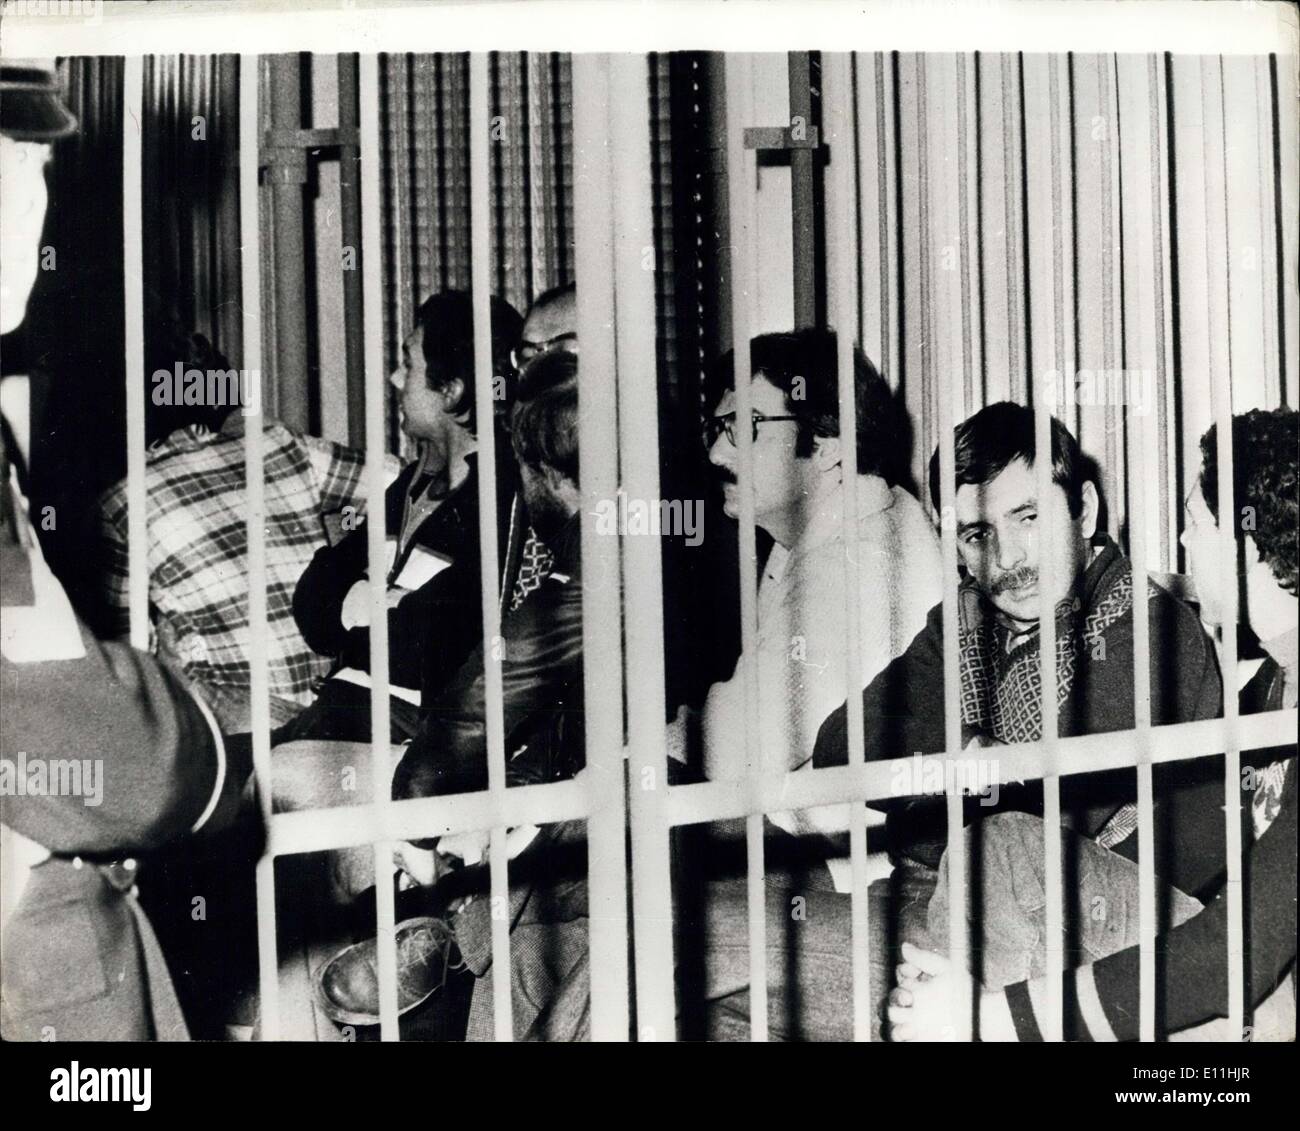 Mar. 16, 1978 - The Trial of the Red Brigade: The trial ofthe red Brigades has started in Italy with tradegy, on the day of the Stock Photo